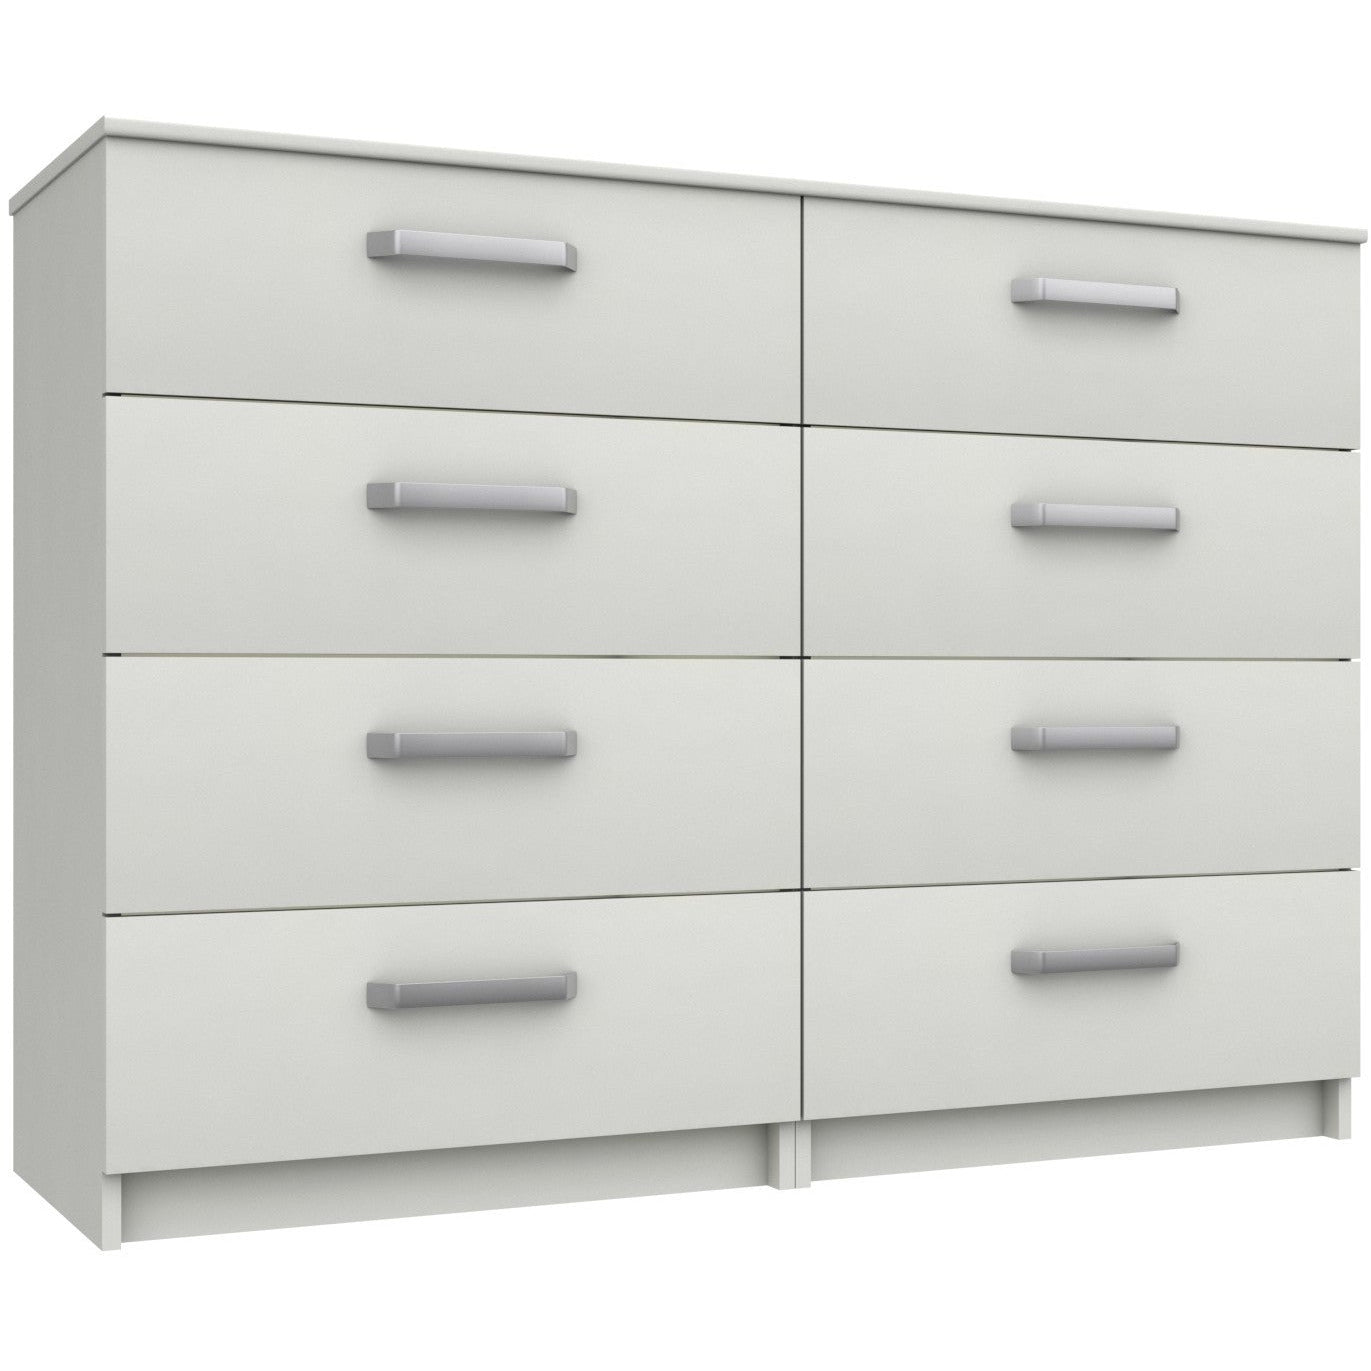 Arran 4 Drawer Double Chest